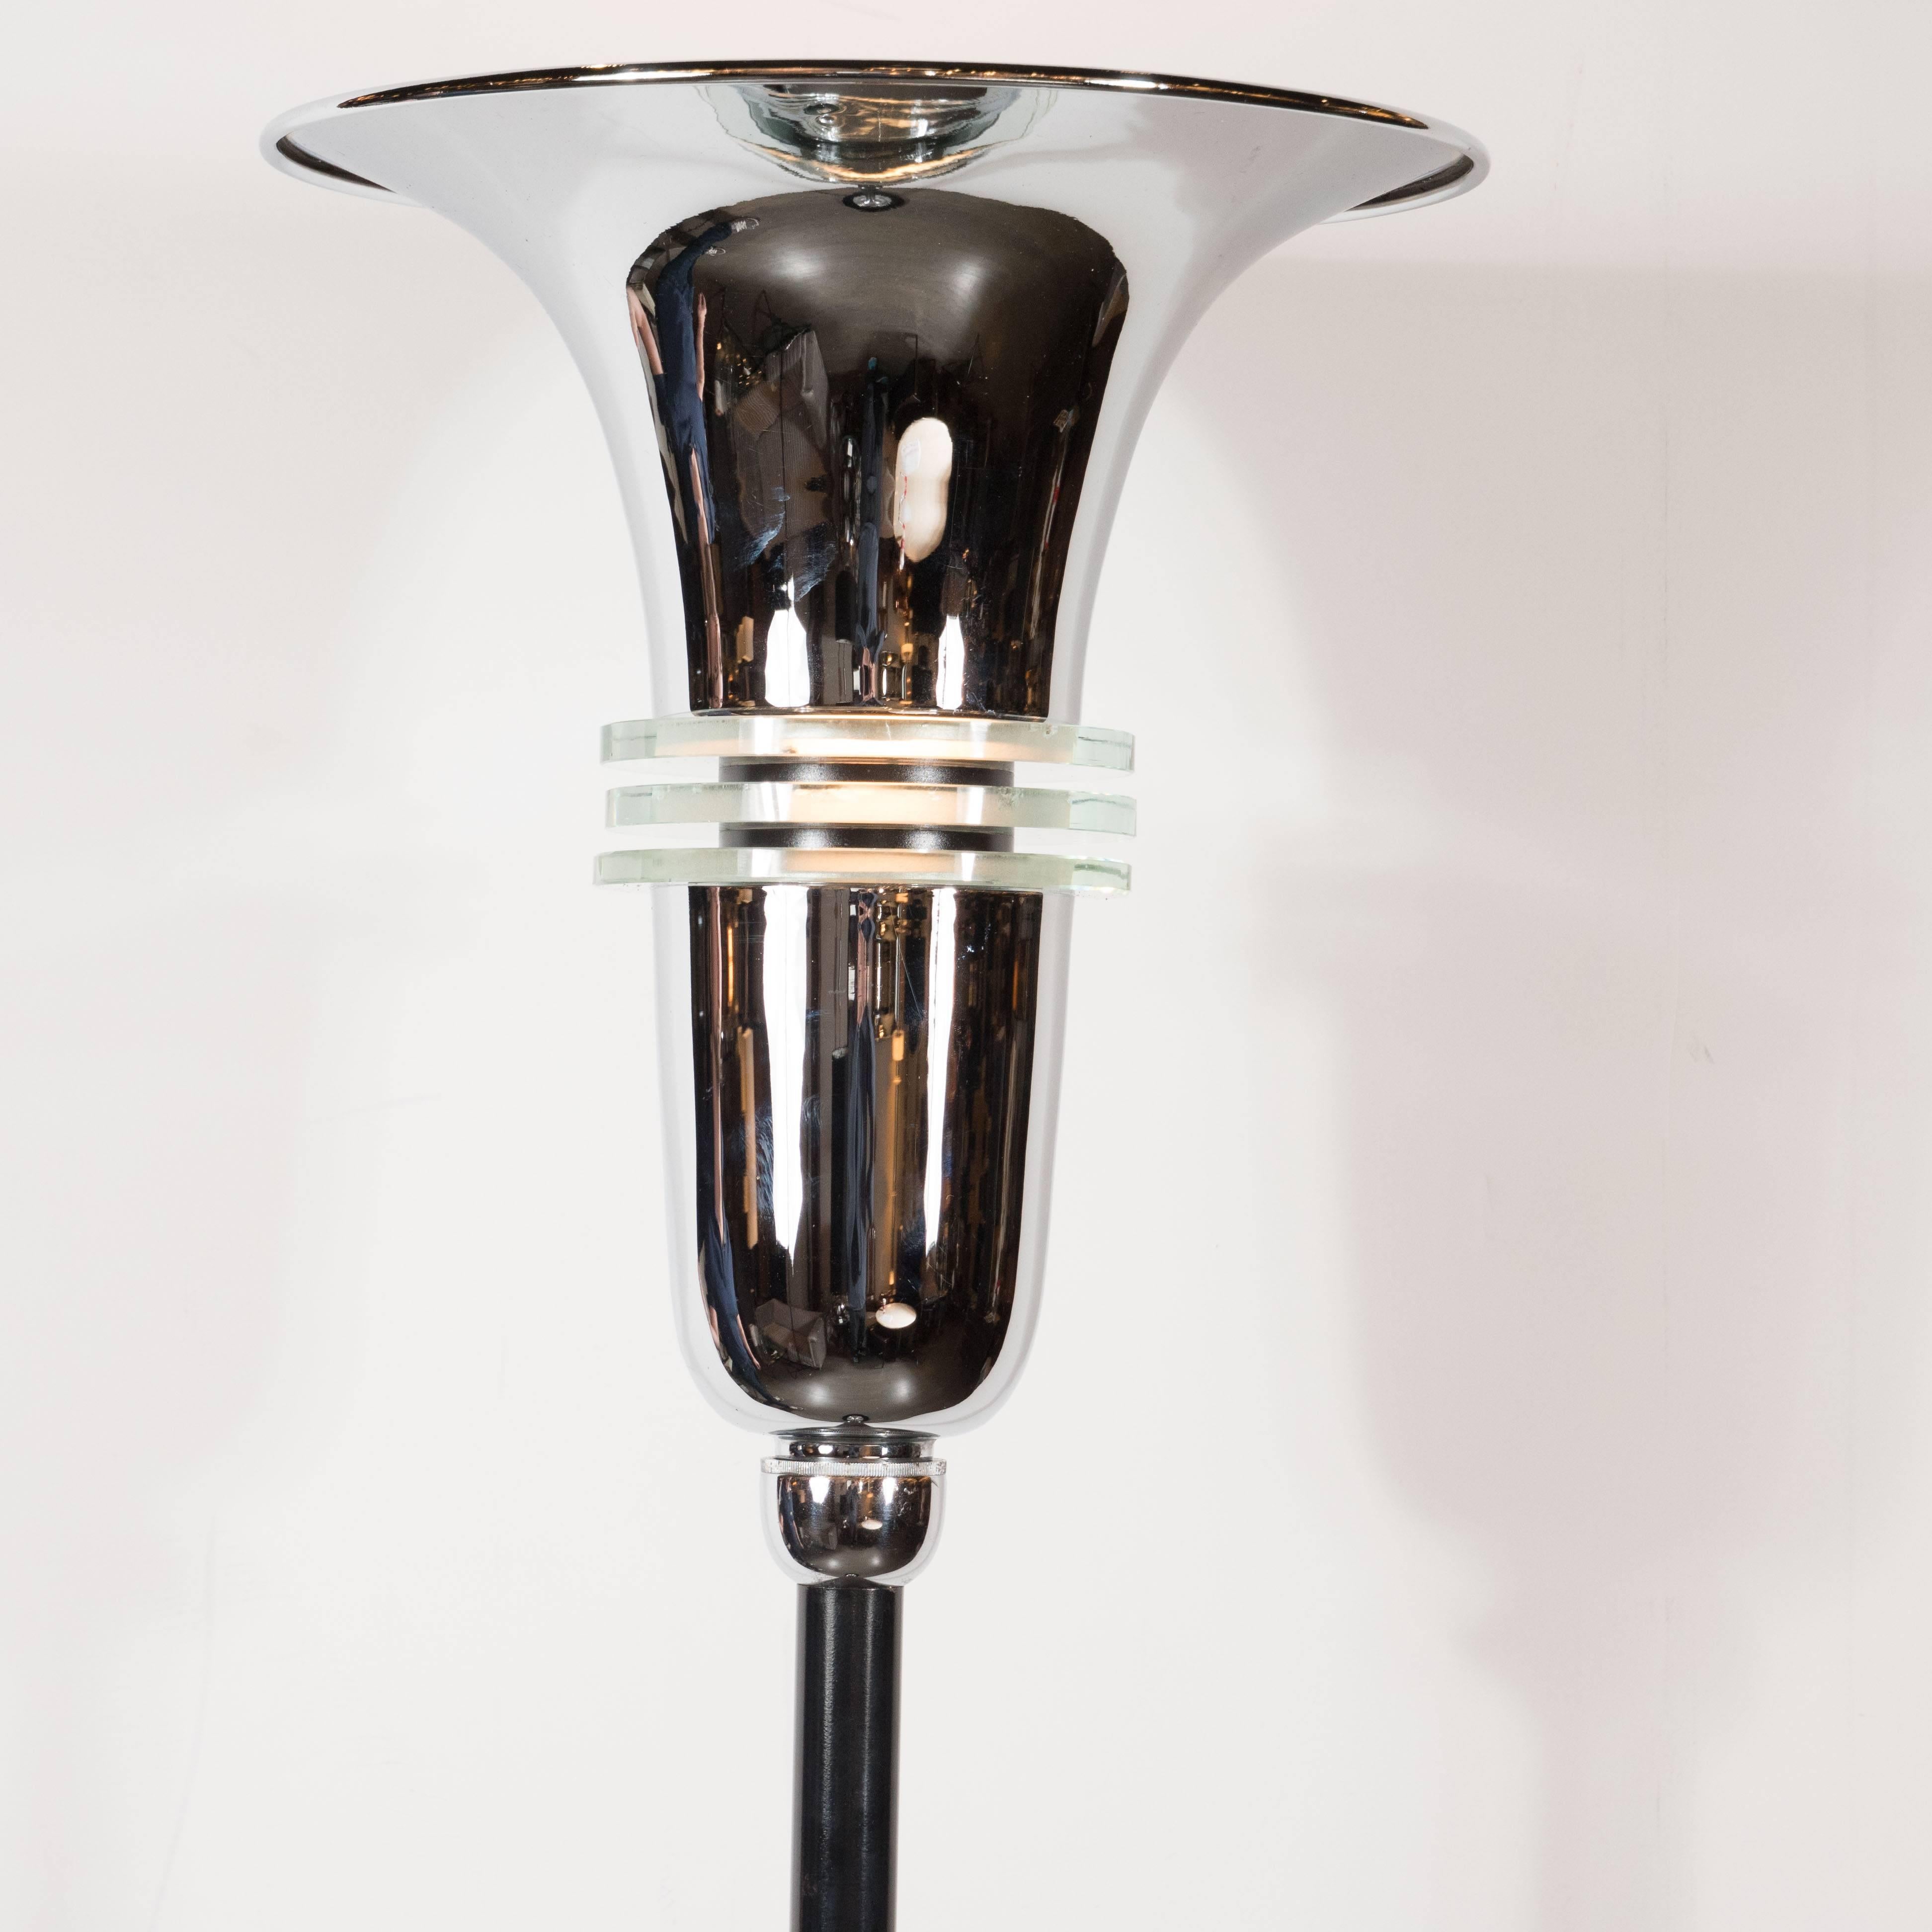 Art Deco Machine Age Chrome & Black Enamel Floor Lamp with Banded Glass Accents 1